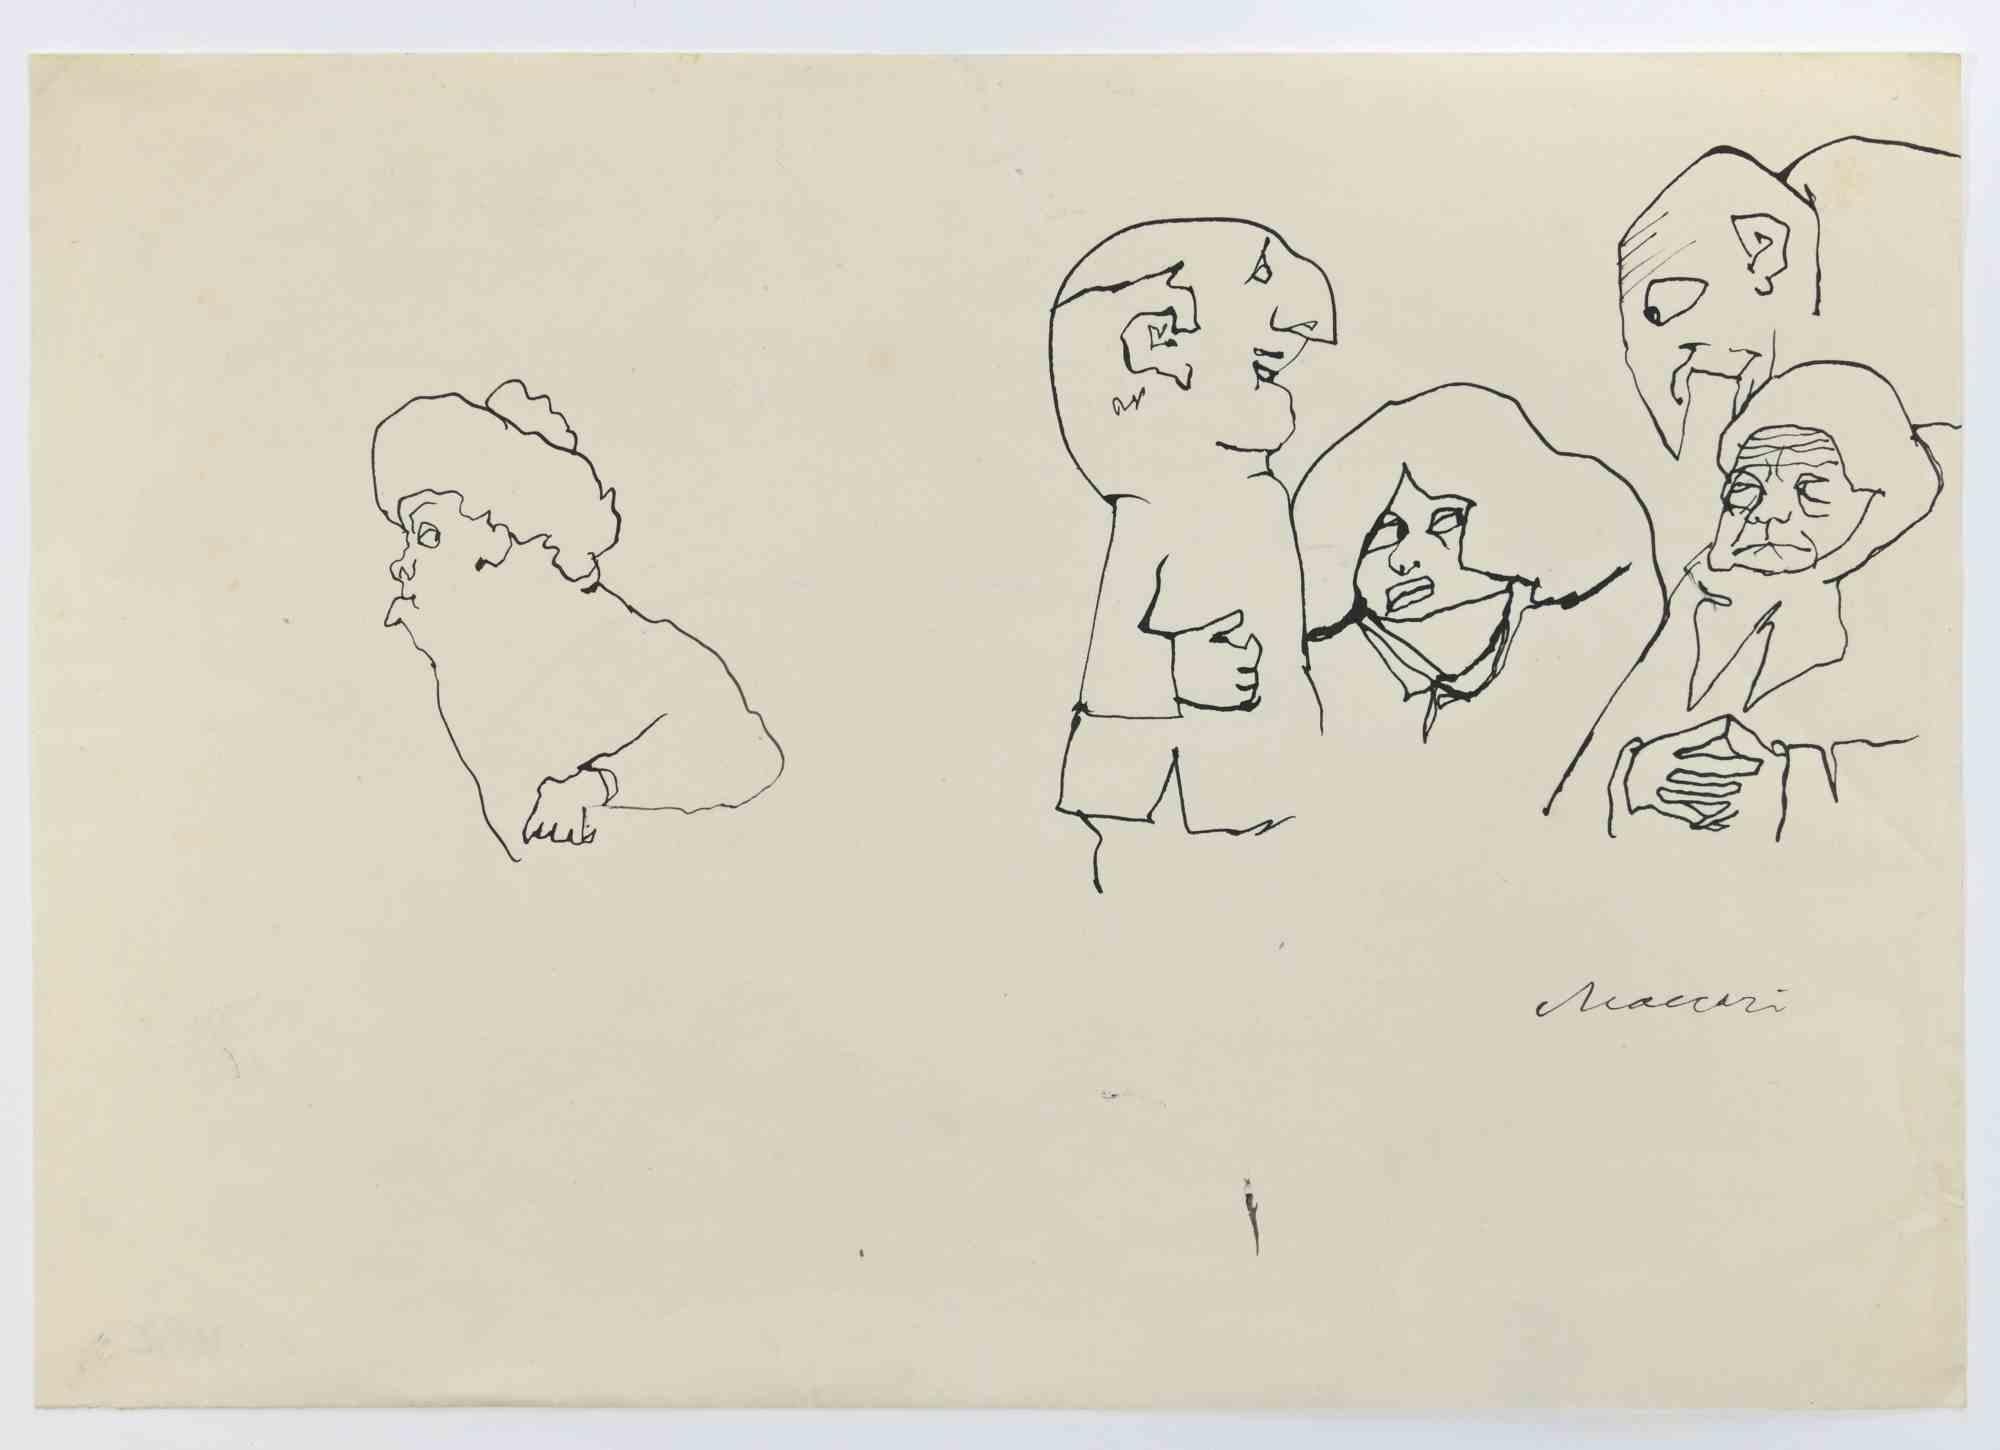 Figures is a China Ink Drawing realized by Mino Maccari  (1924-1989) in the 1950s.

Hand-signed on the lower.

Good condition with slight folding.

Mino Maccari (Siena, 1924-Rome, June 16, 1989) was an Italian writer, painter, engraver and